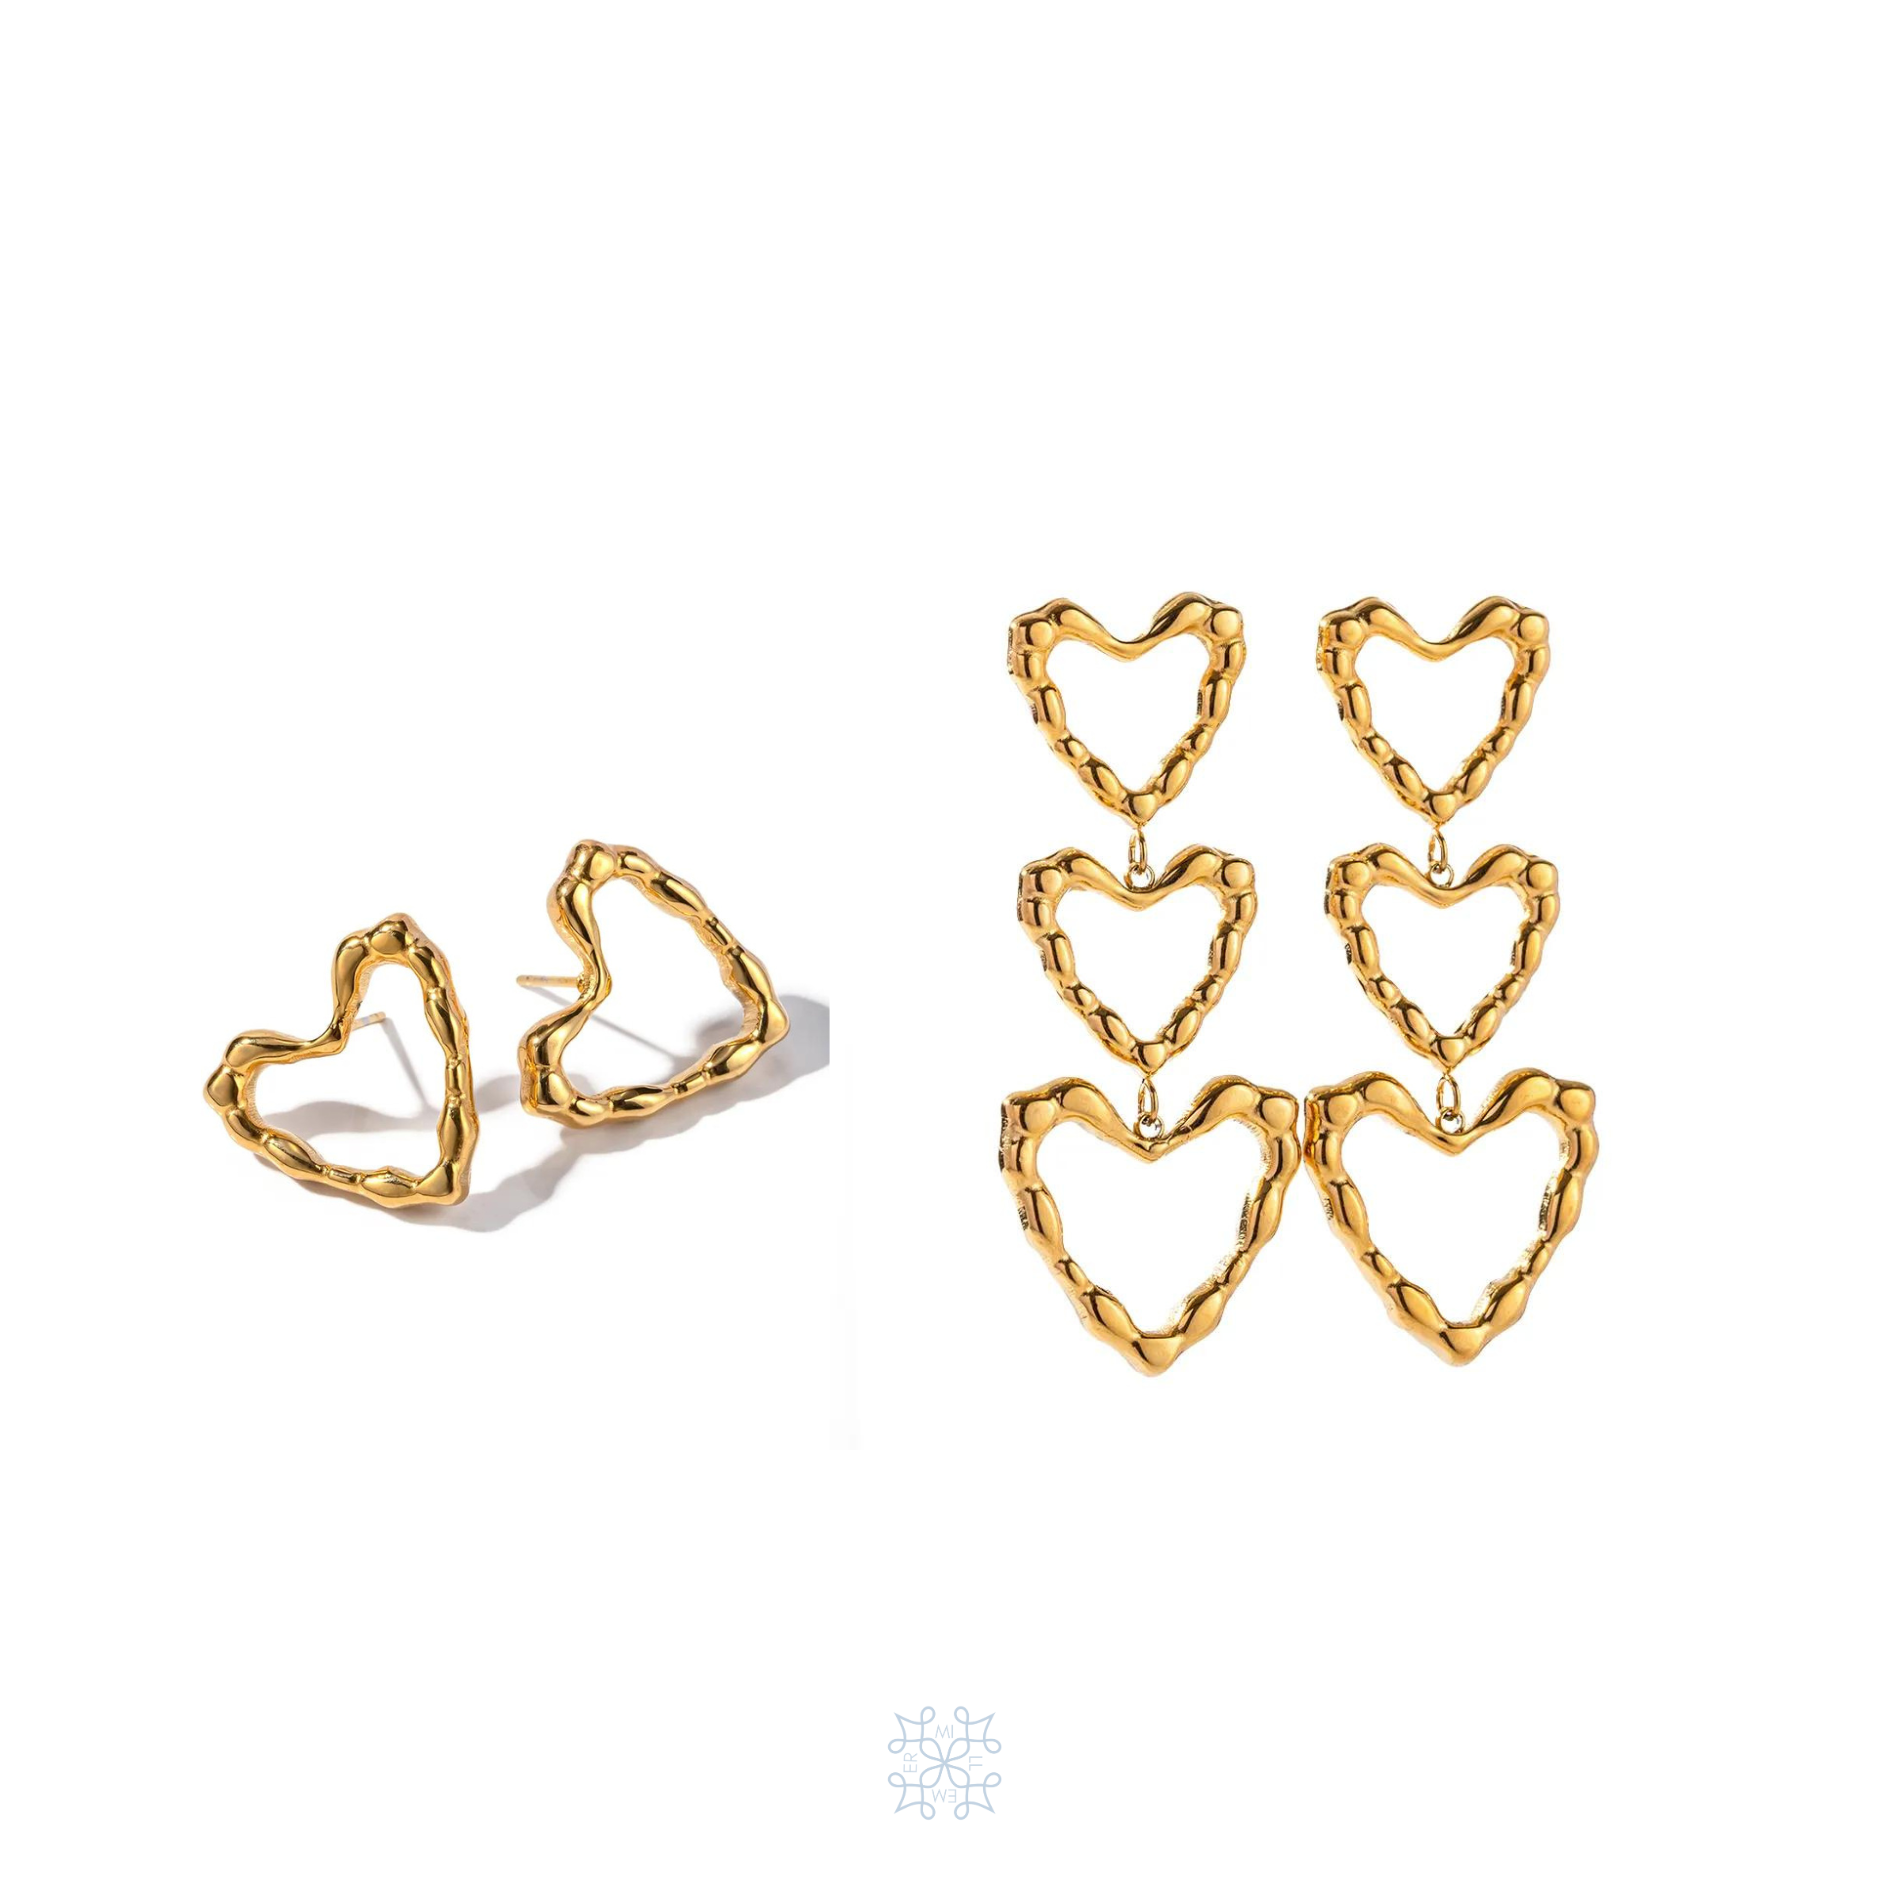 Heart shaped earrings. Dune heart gold Bundle. Two sets of earrings. One pair has 3 drop hearts. One pair has only one heart stud. They create a missmatched set worn together . One side drop earring and the other stud. The shape and texture of bot h designs is irregular heart shape texture. 